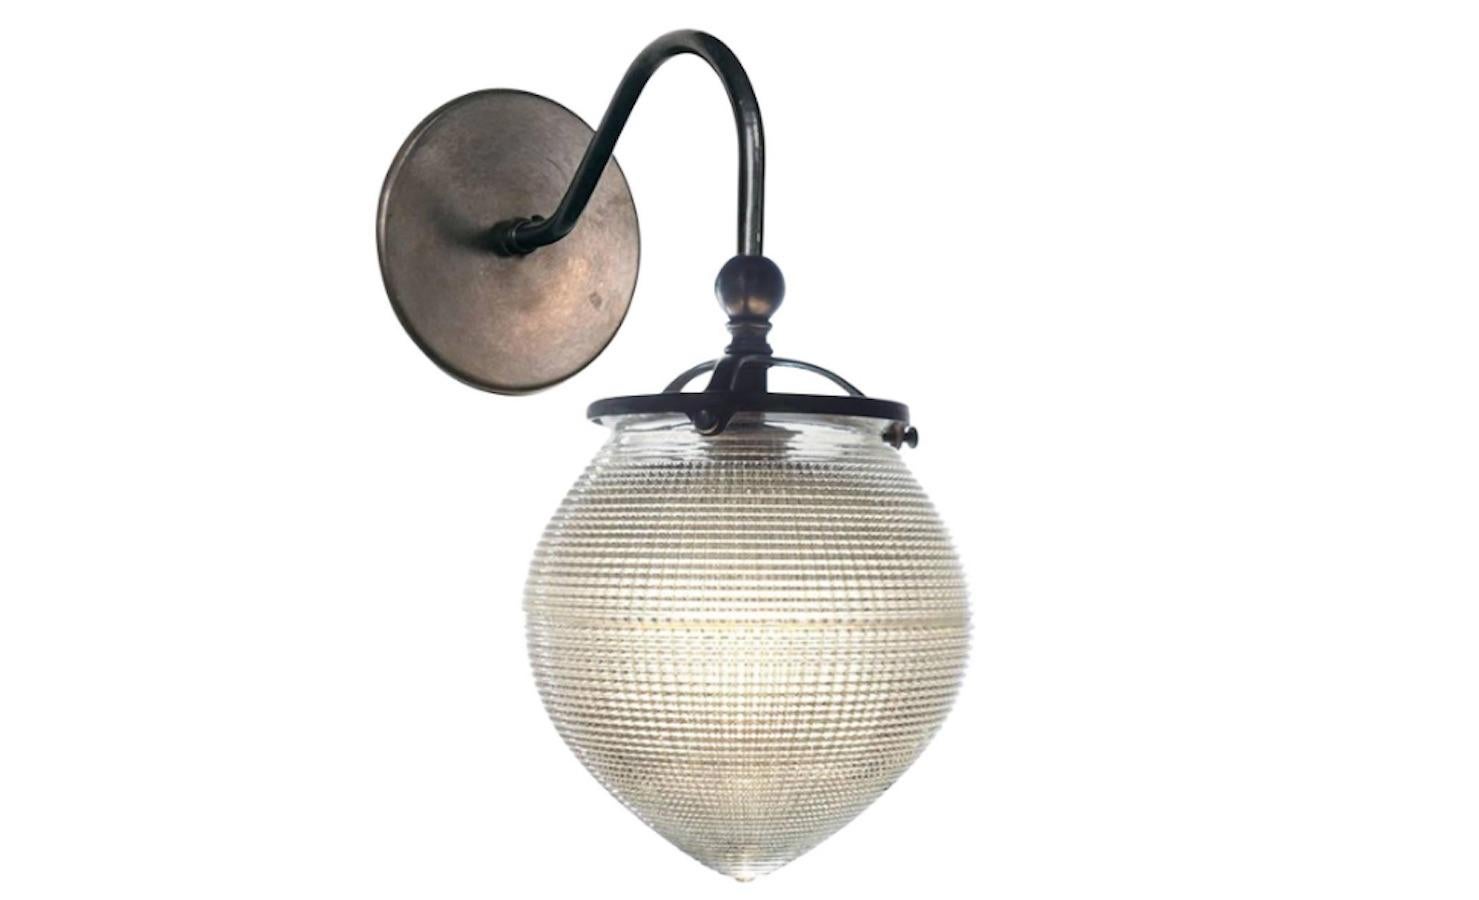 This acorn shaped shade is a favorite. The style was mainly used as lighting for dentists. The shape is very pleasing and makes a perfect simple sconce. The thick prismatic glass gives off beautiful even light.